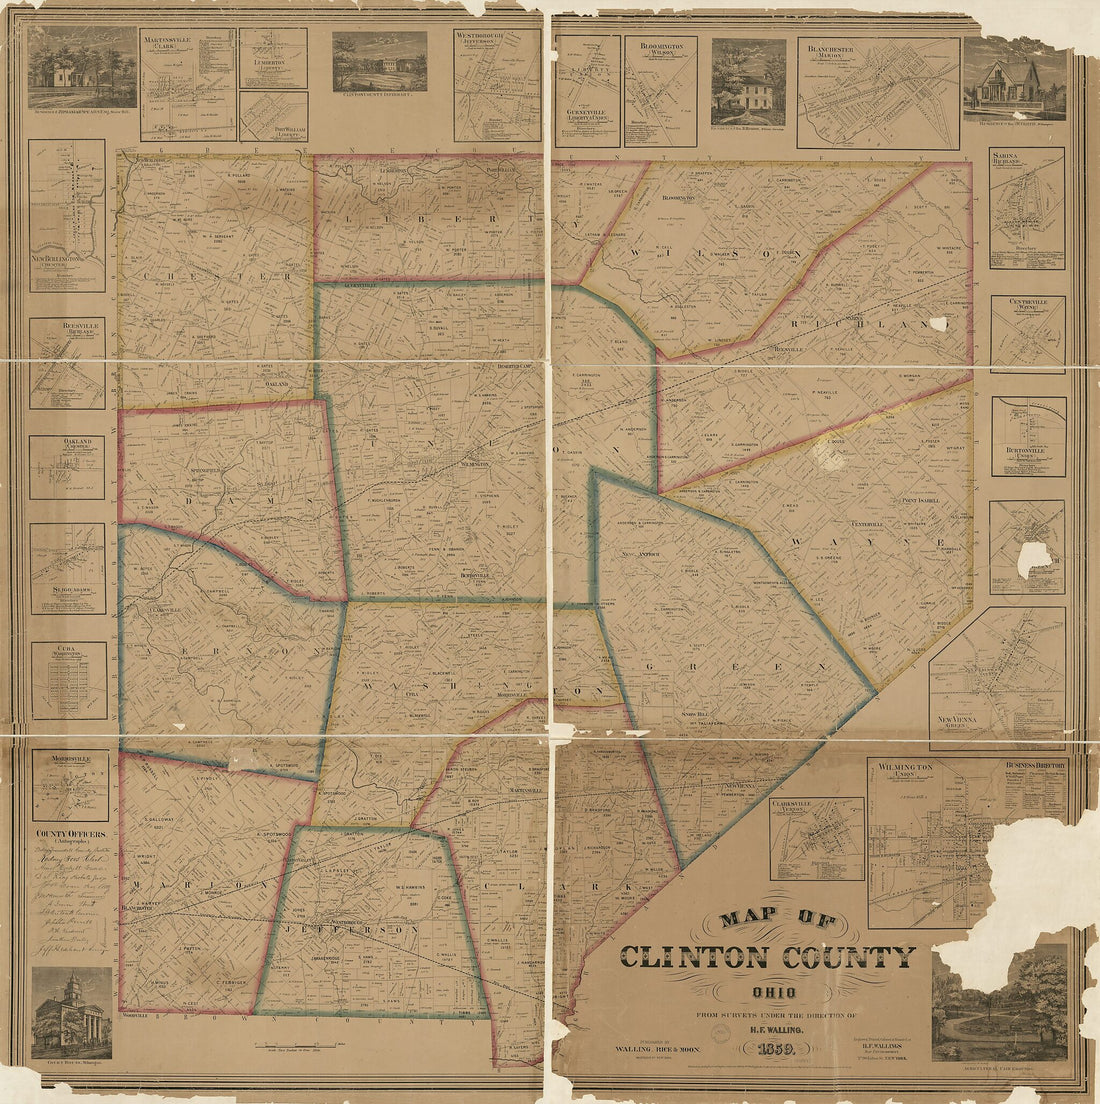 This old map of Map of Clinton County, Ohio from 1859 was created by  H.F. Wallings Map Establishment, Henry Francis Walling in 1859